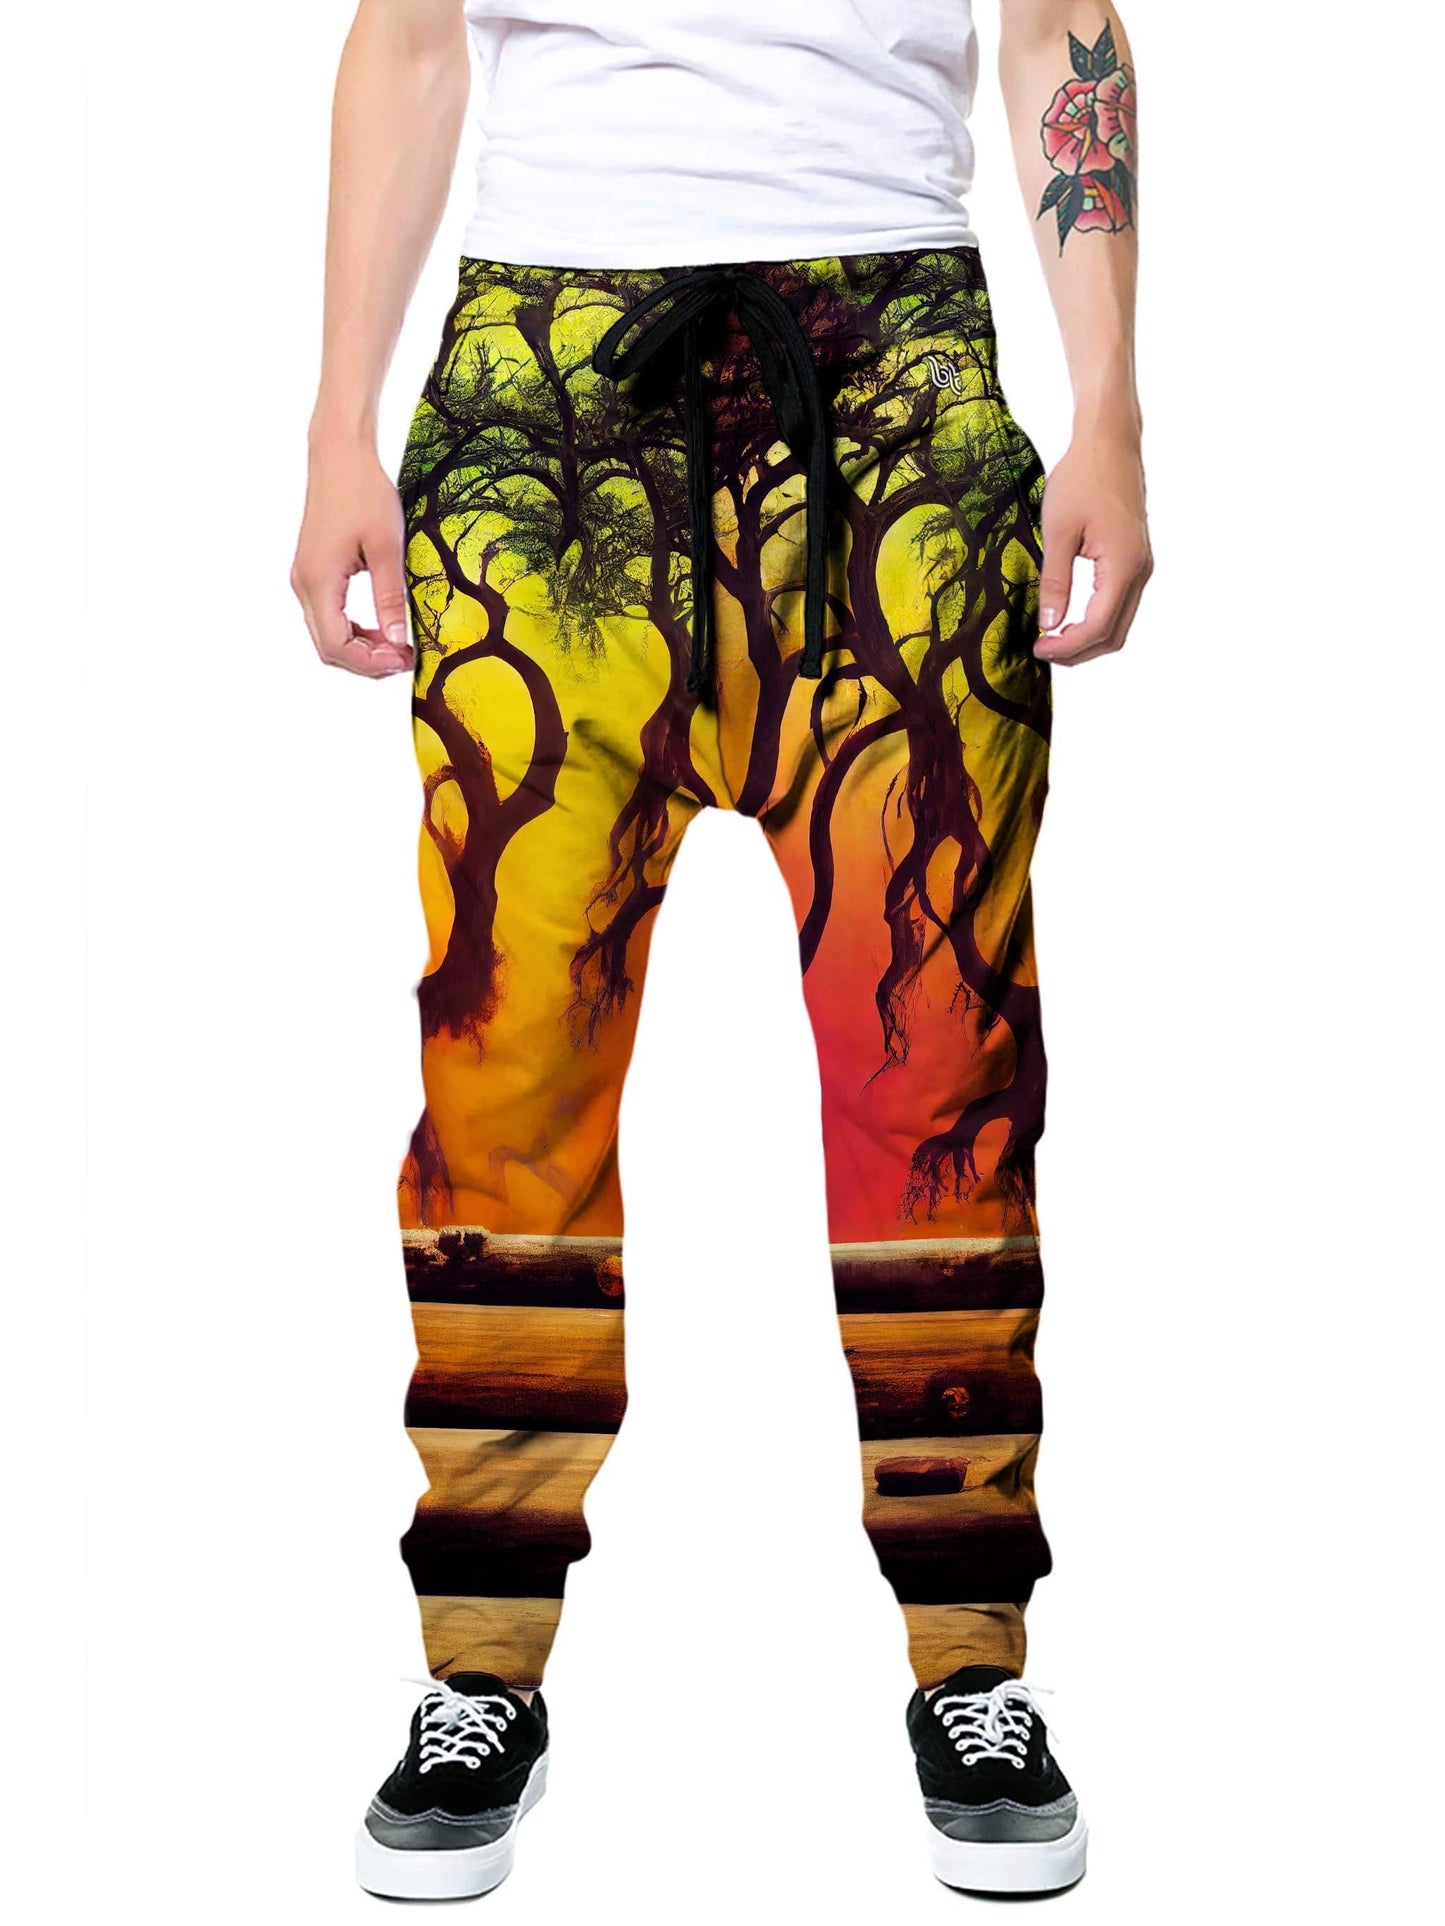 Calamitous Belief Joggers, Gratefully Dyed, | iEDM